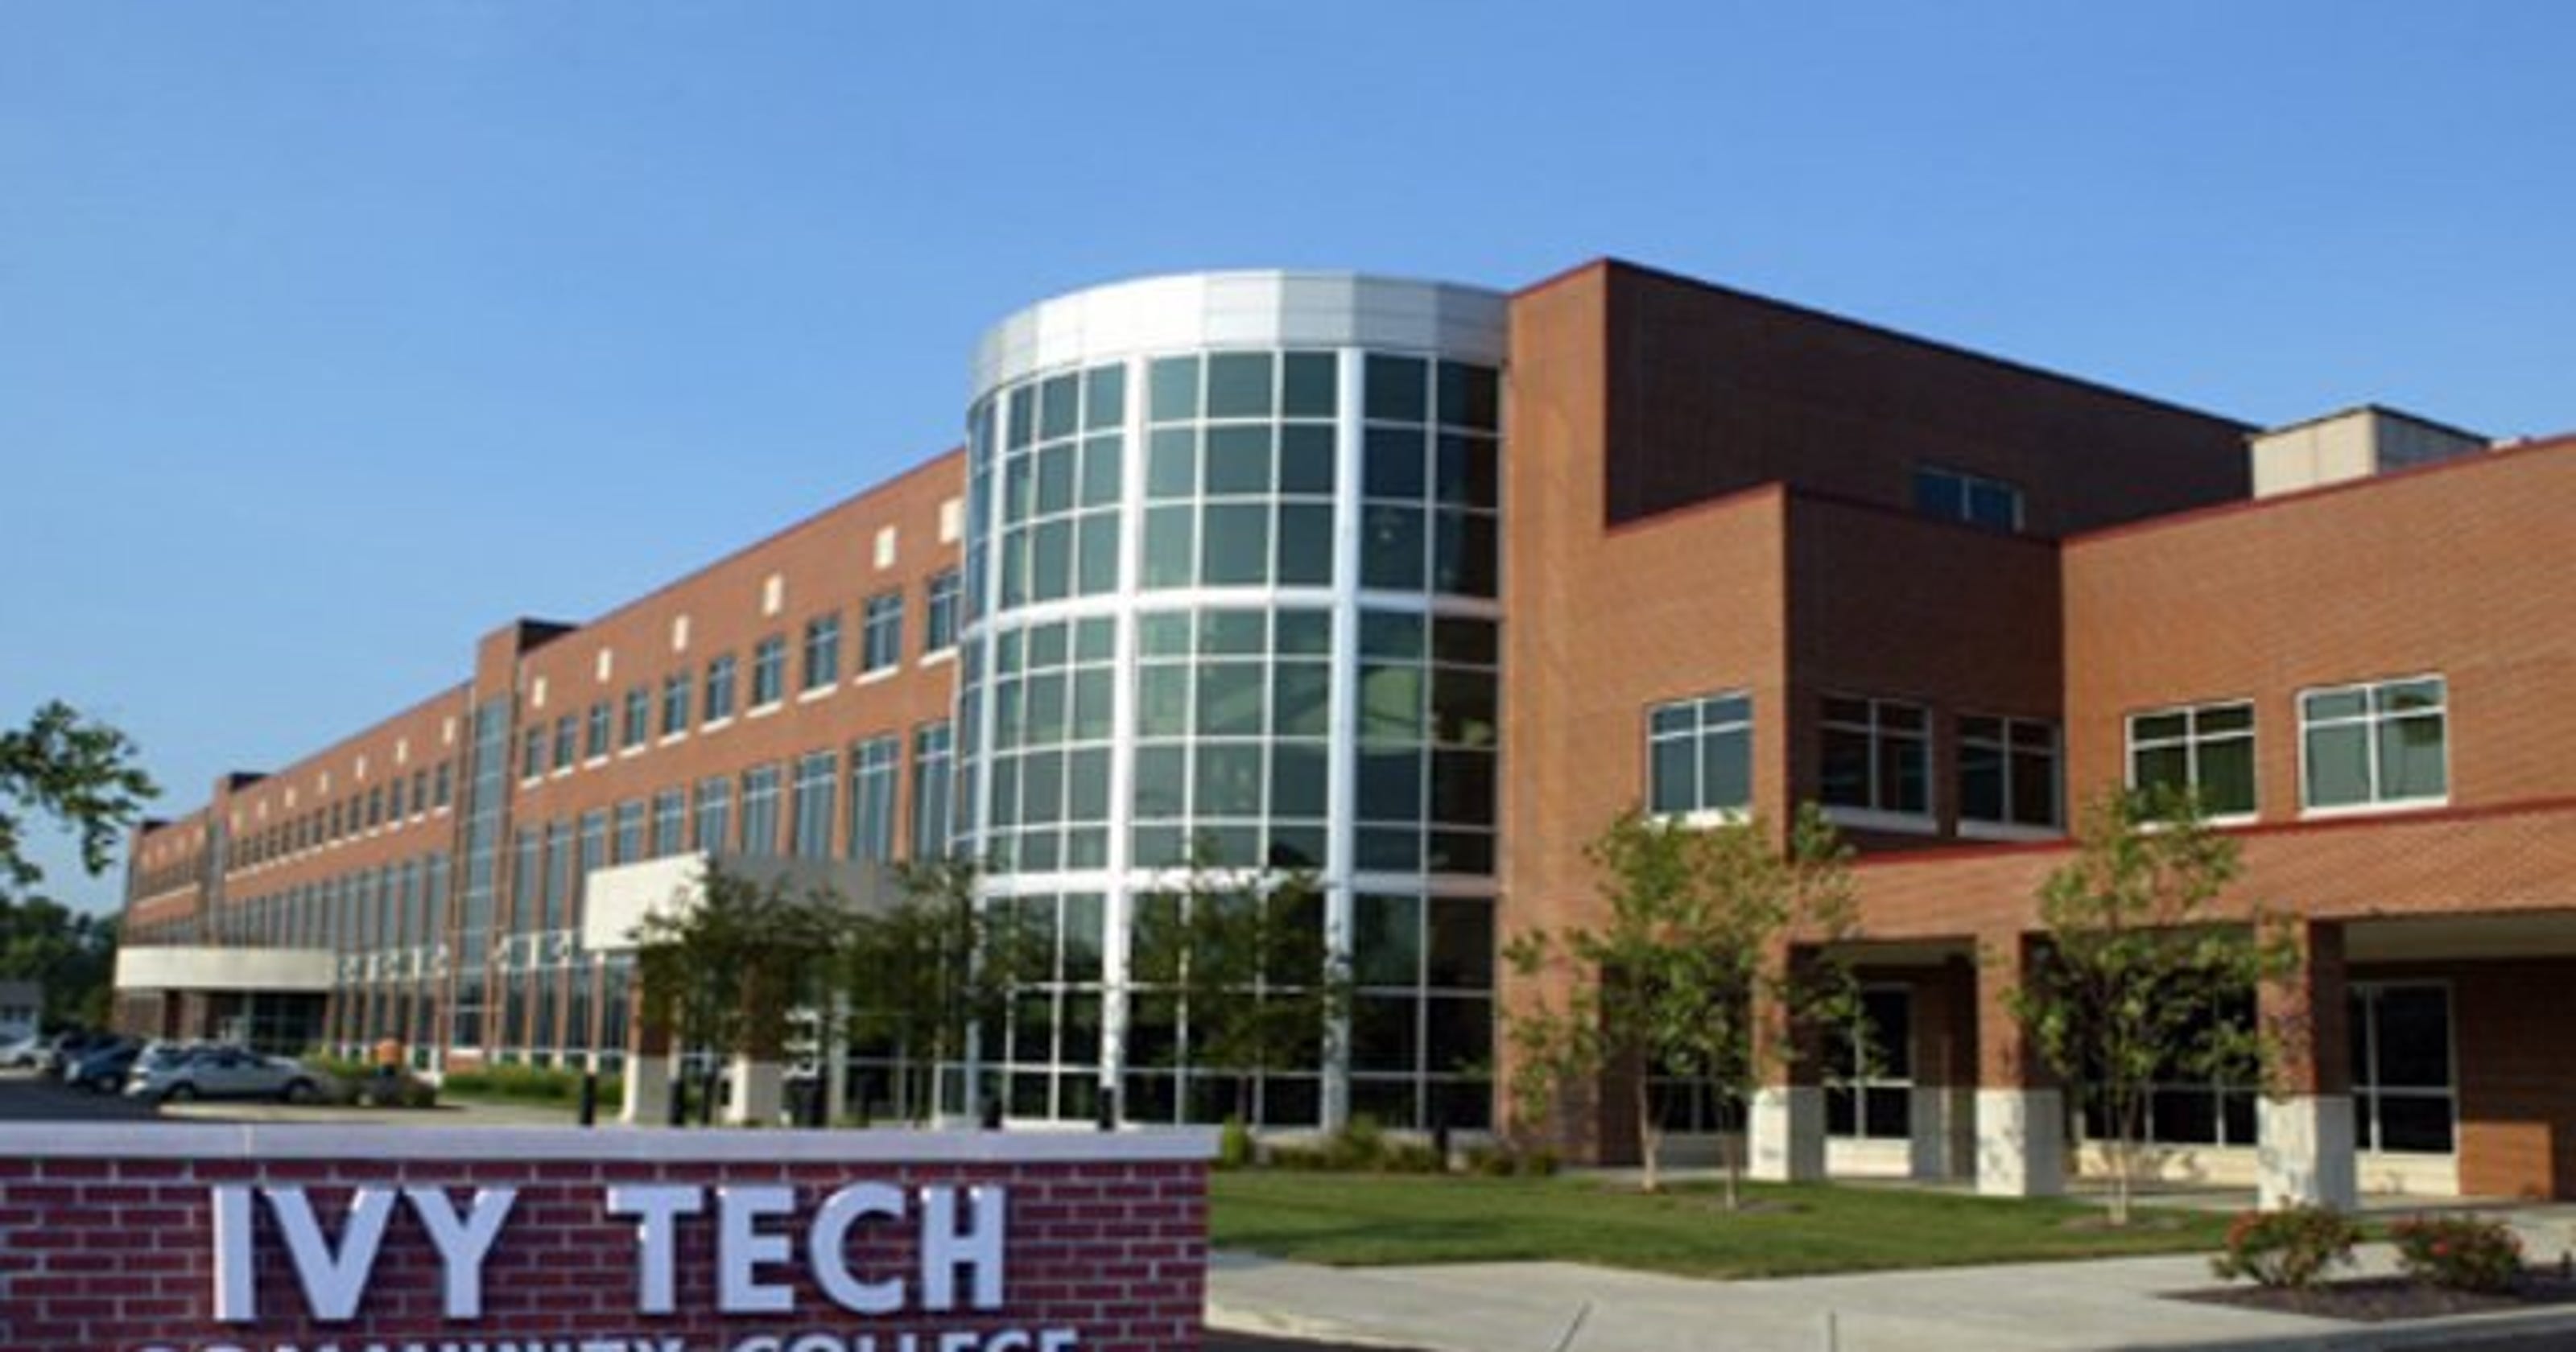 Ivy Tech fall 2018 enrollment slightly lower expected to increase